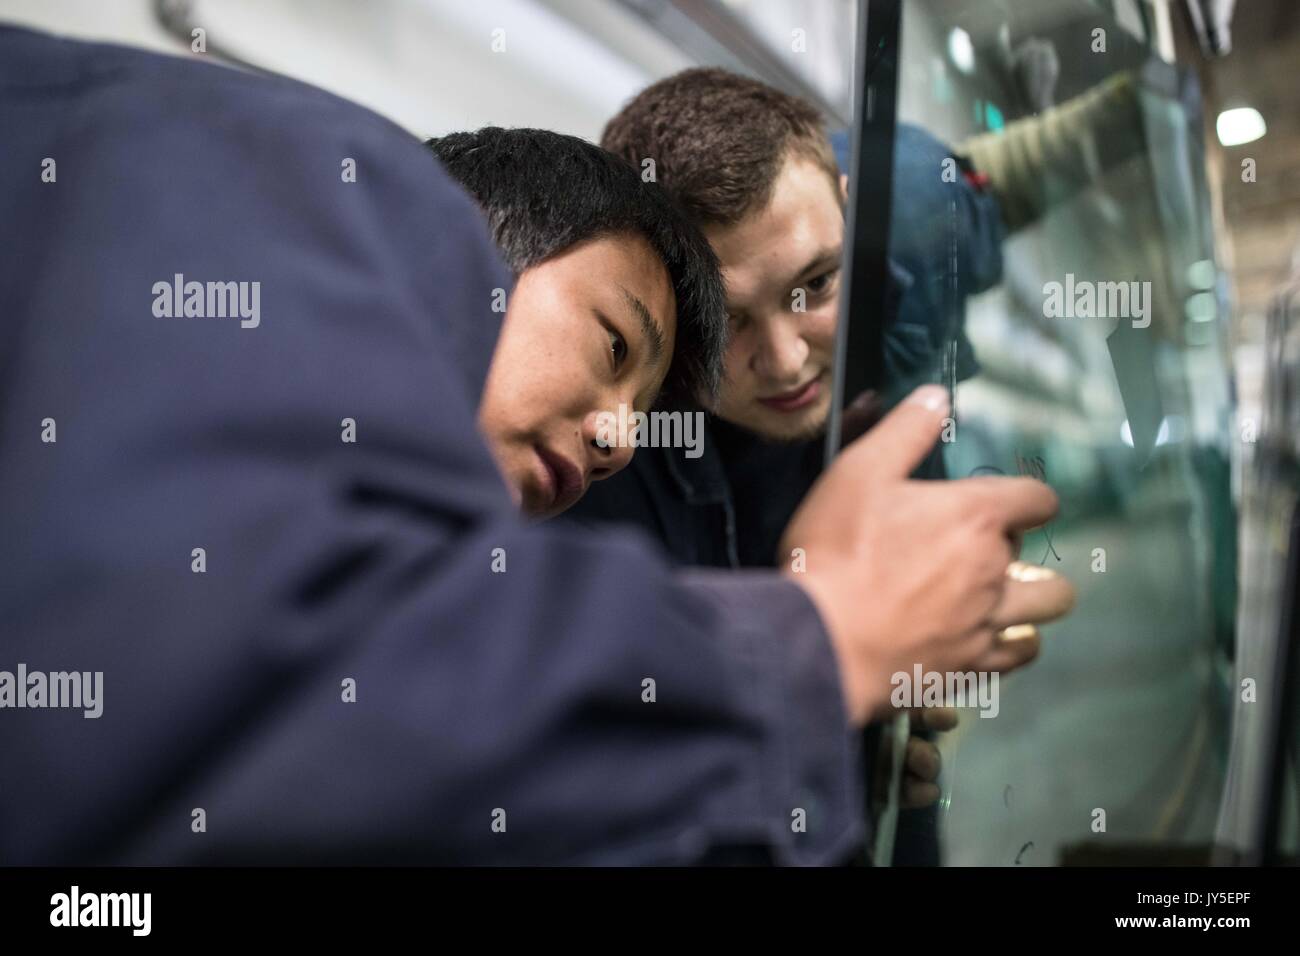 Kaluga, Russia. 18th July, 2017. Chinese and Russian workers work at an automobile-level float glass production line in the Russian factory of China's Fuyao Glass Industry Group Co. in Kaluga, Russia, July 18, 2017. Fuyao Group is a well-known Chinese enterprise that specializes in producing automobile safety glass and industrial technological glass. Fuyao invested in 2011 some 200 million U.S. dollars to build automobile-level float glass production lines in Kaluga. Credit: Wu Zhuang/Xinhua/Alamy Live News Stock Photo